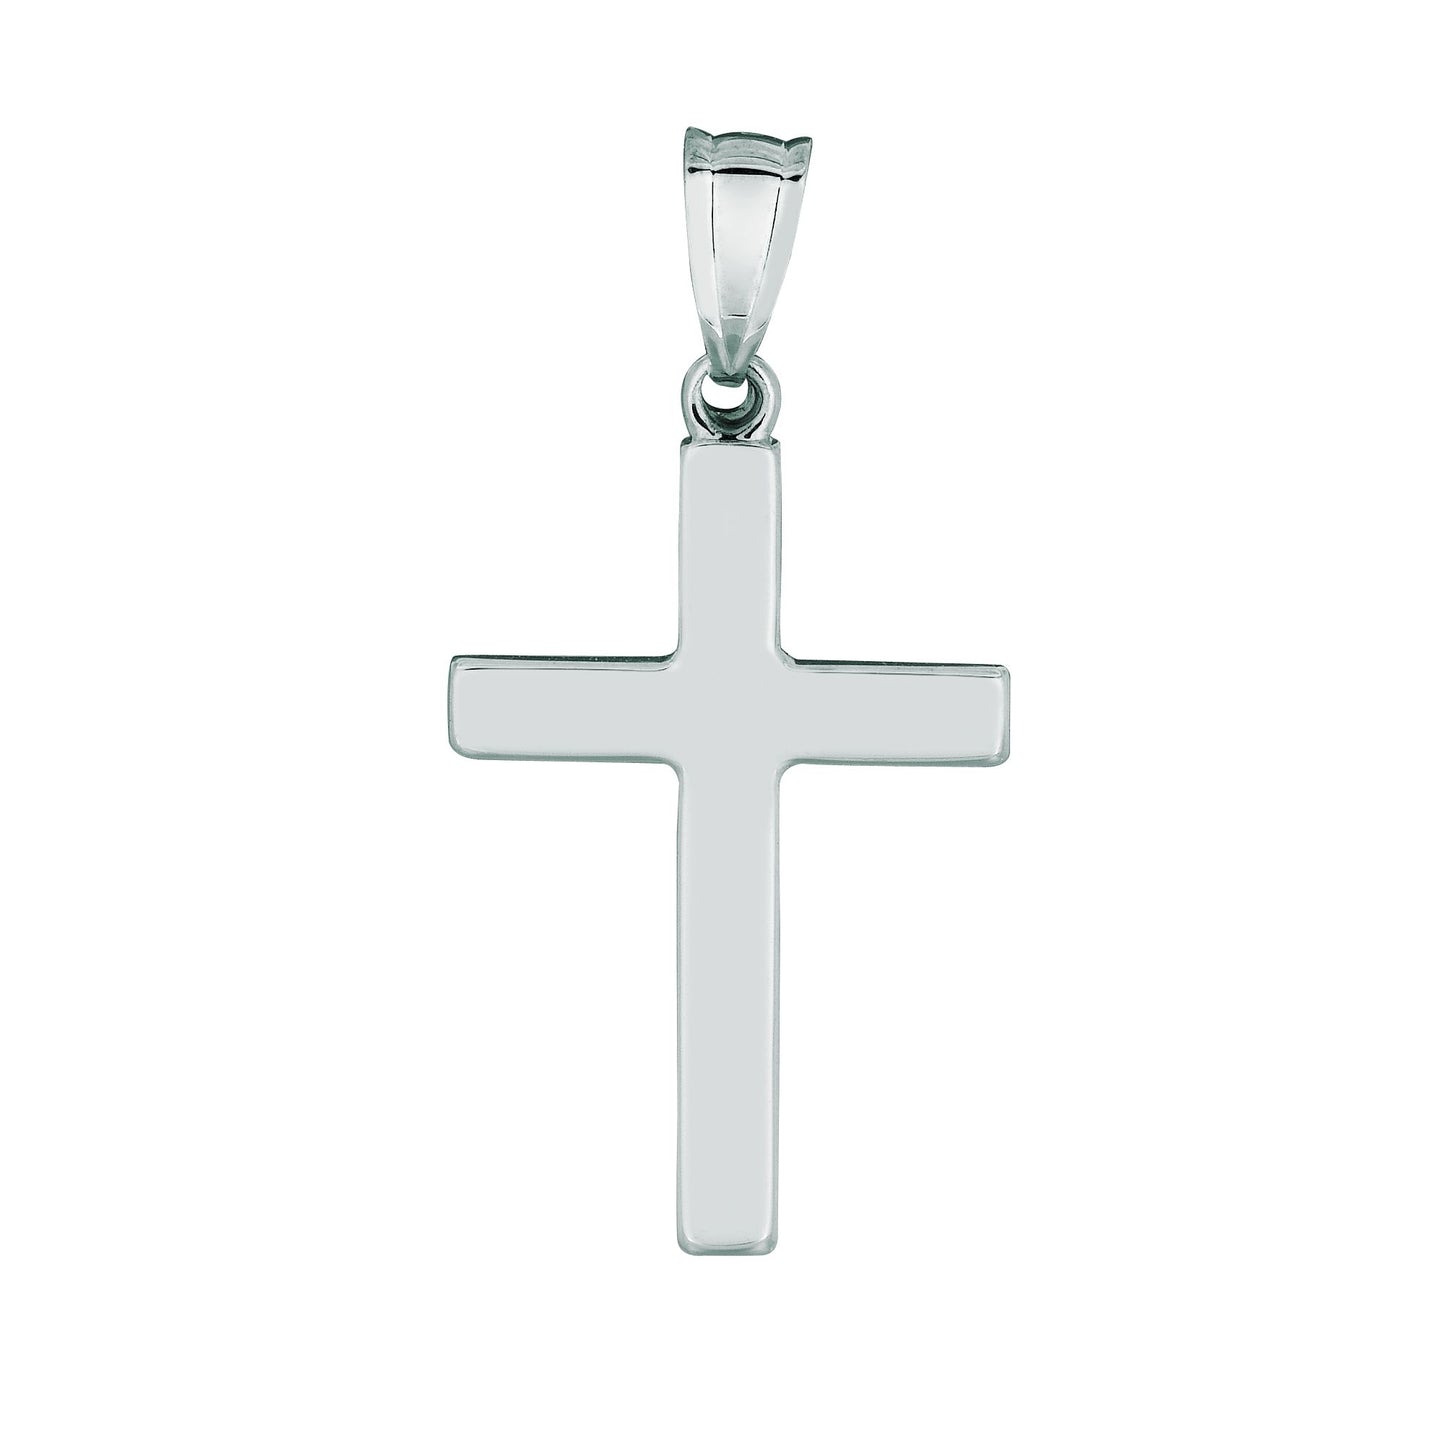 Polished Flat Cross | Available in 14K Gold or Sterling Silver